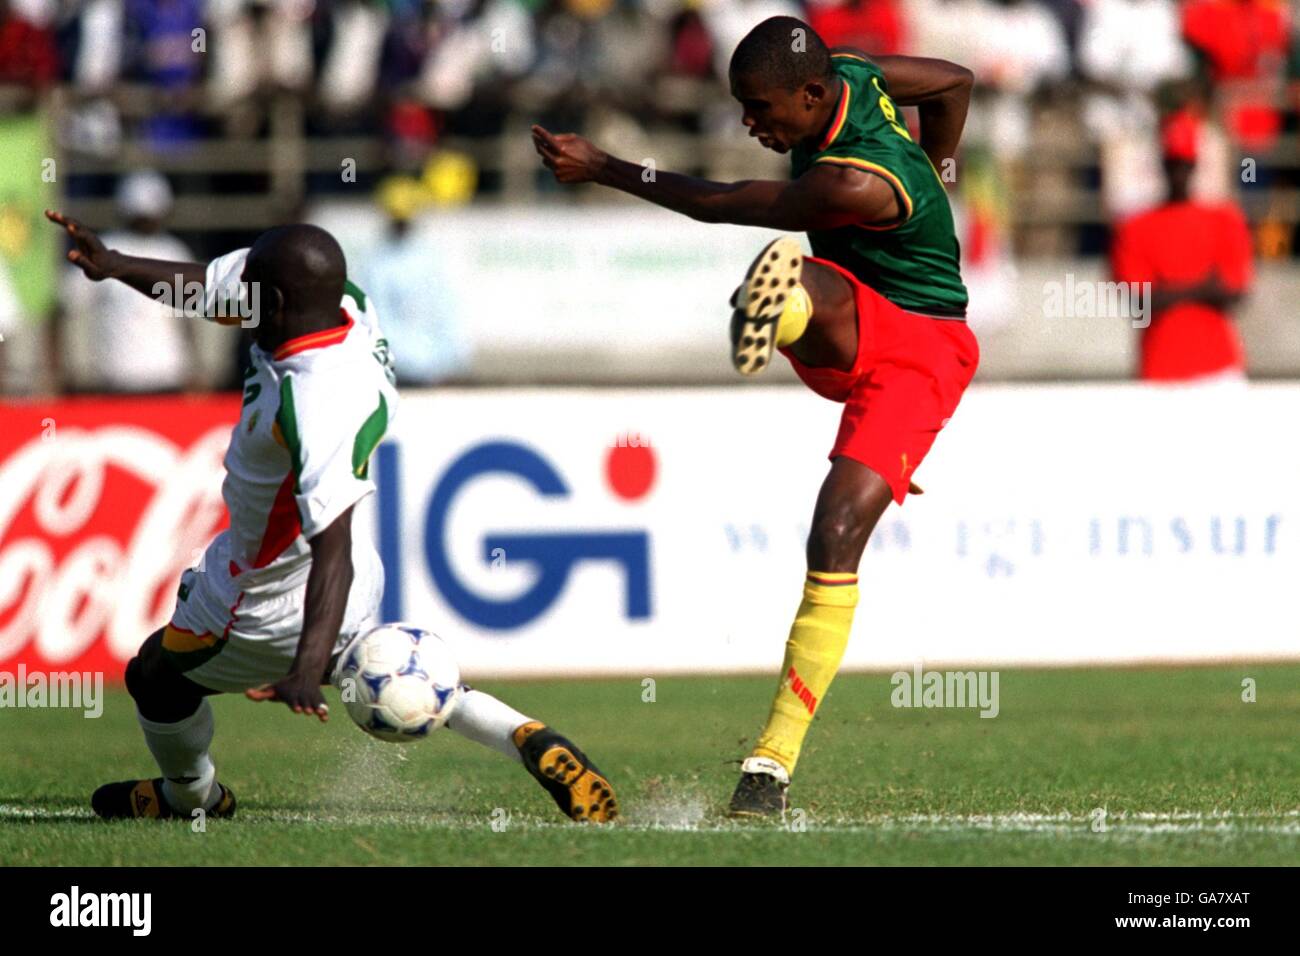 Soccer - African Nations Cup Mali 2002 - Final - Senegal v Cameroon Stock Photo